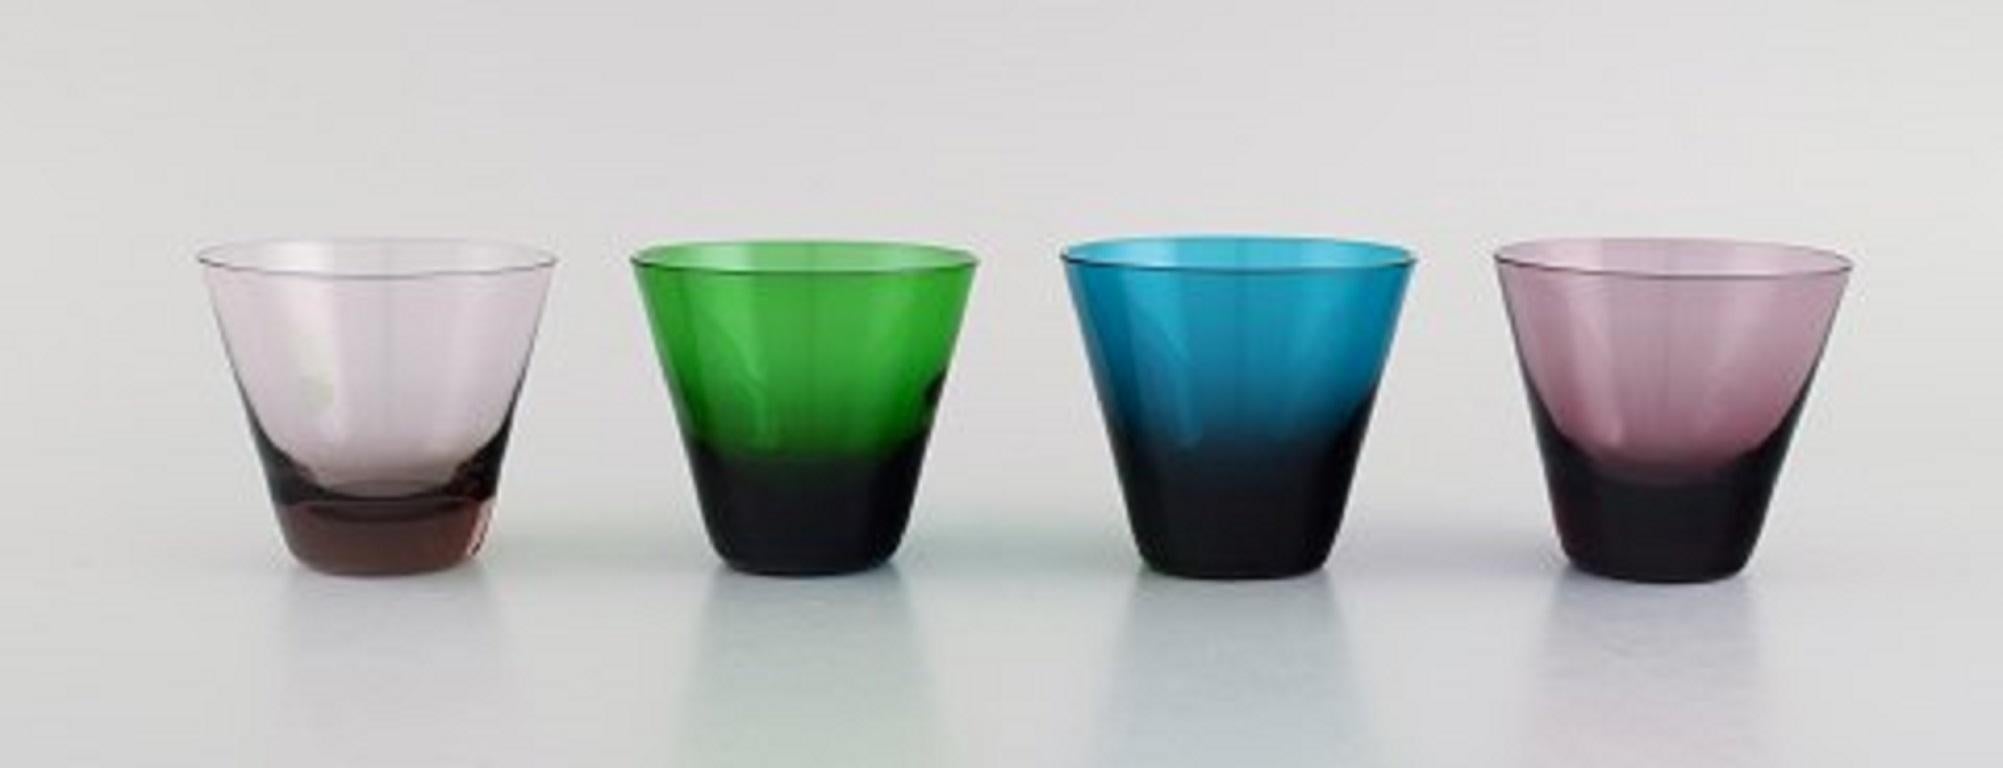 Lennart Rosén for Reijmyre. Nine Mambo drinking glasses in mouth-blown art glass. 1950s.
Measures: 7.3 x 6.5 cm.
In excellent condition.